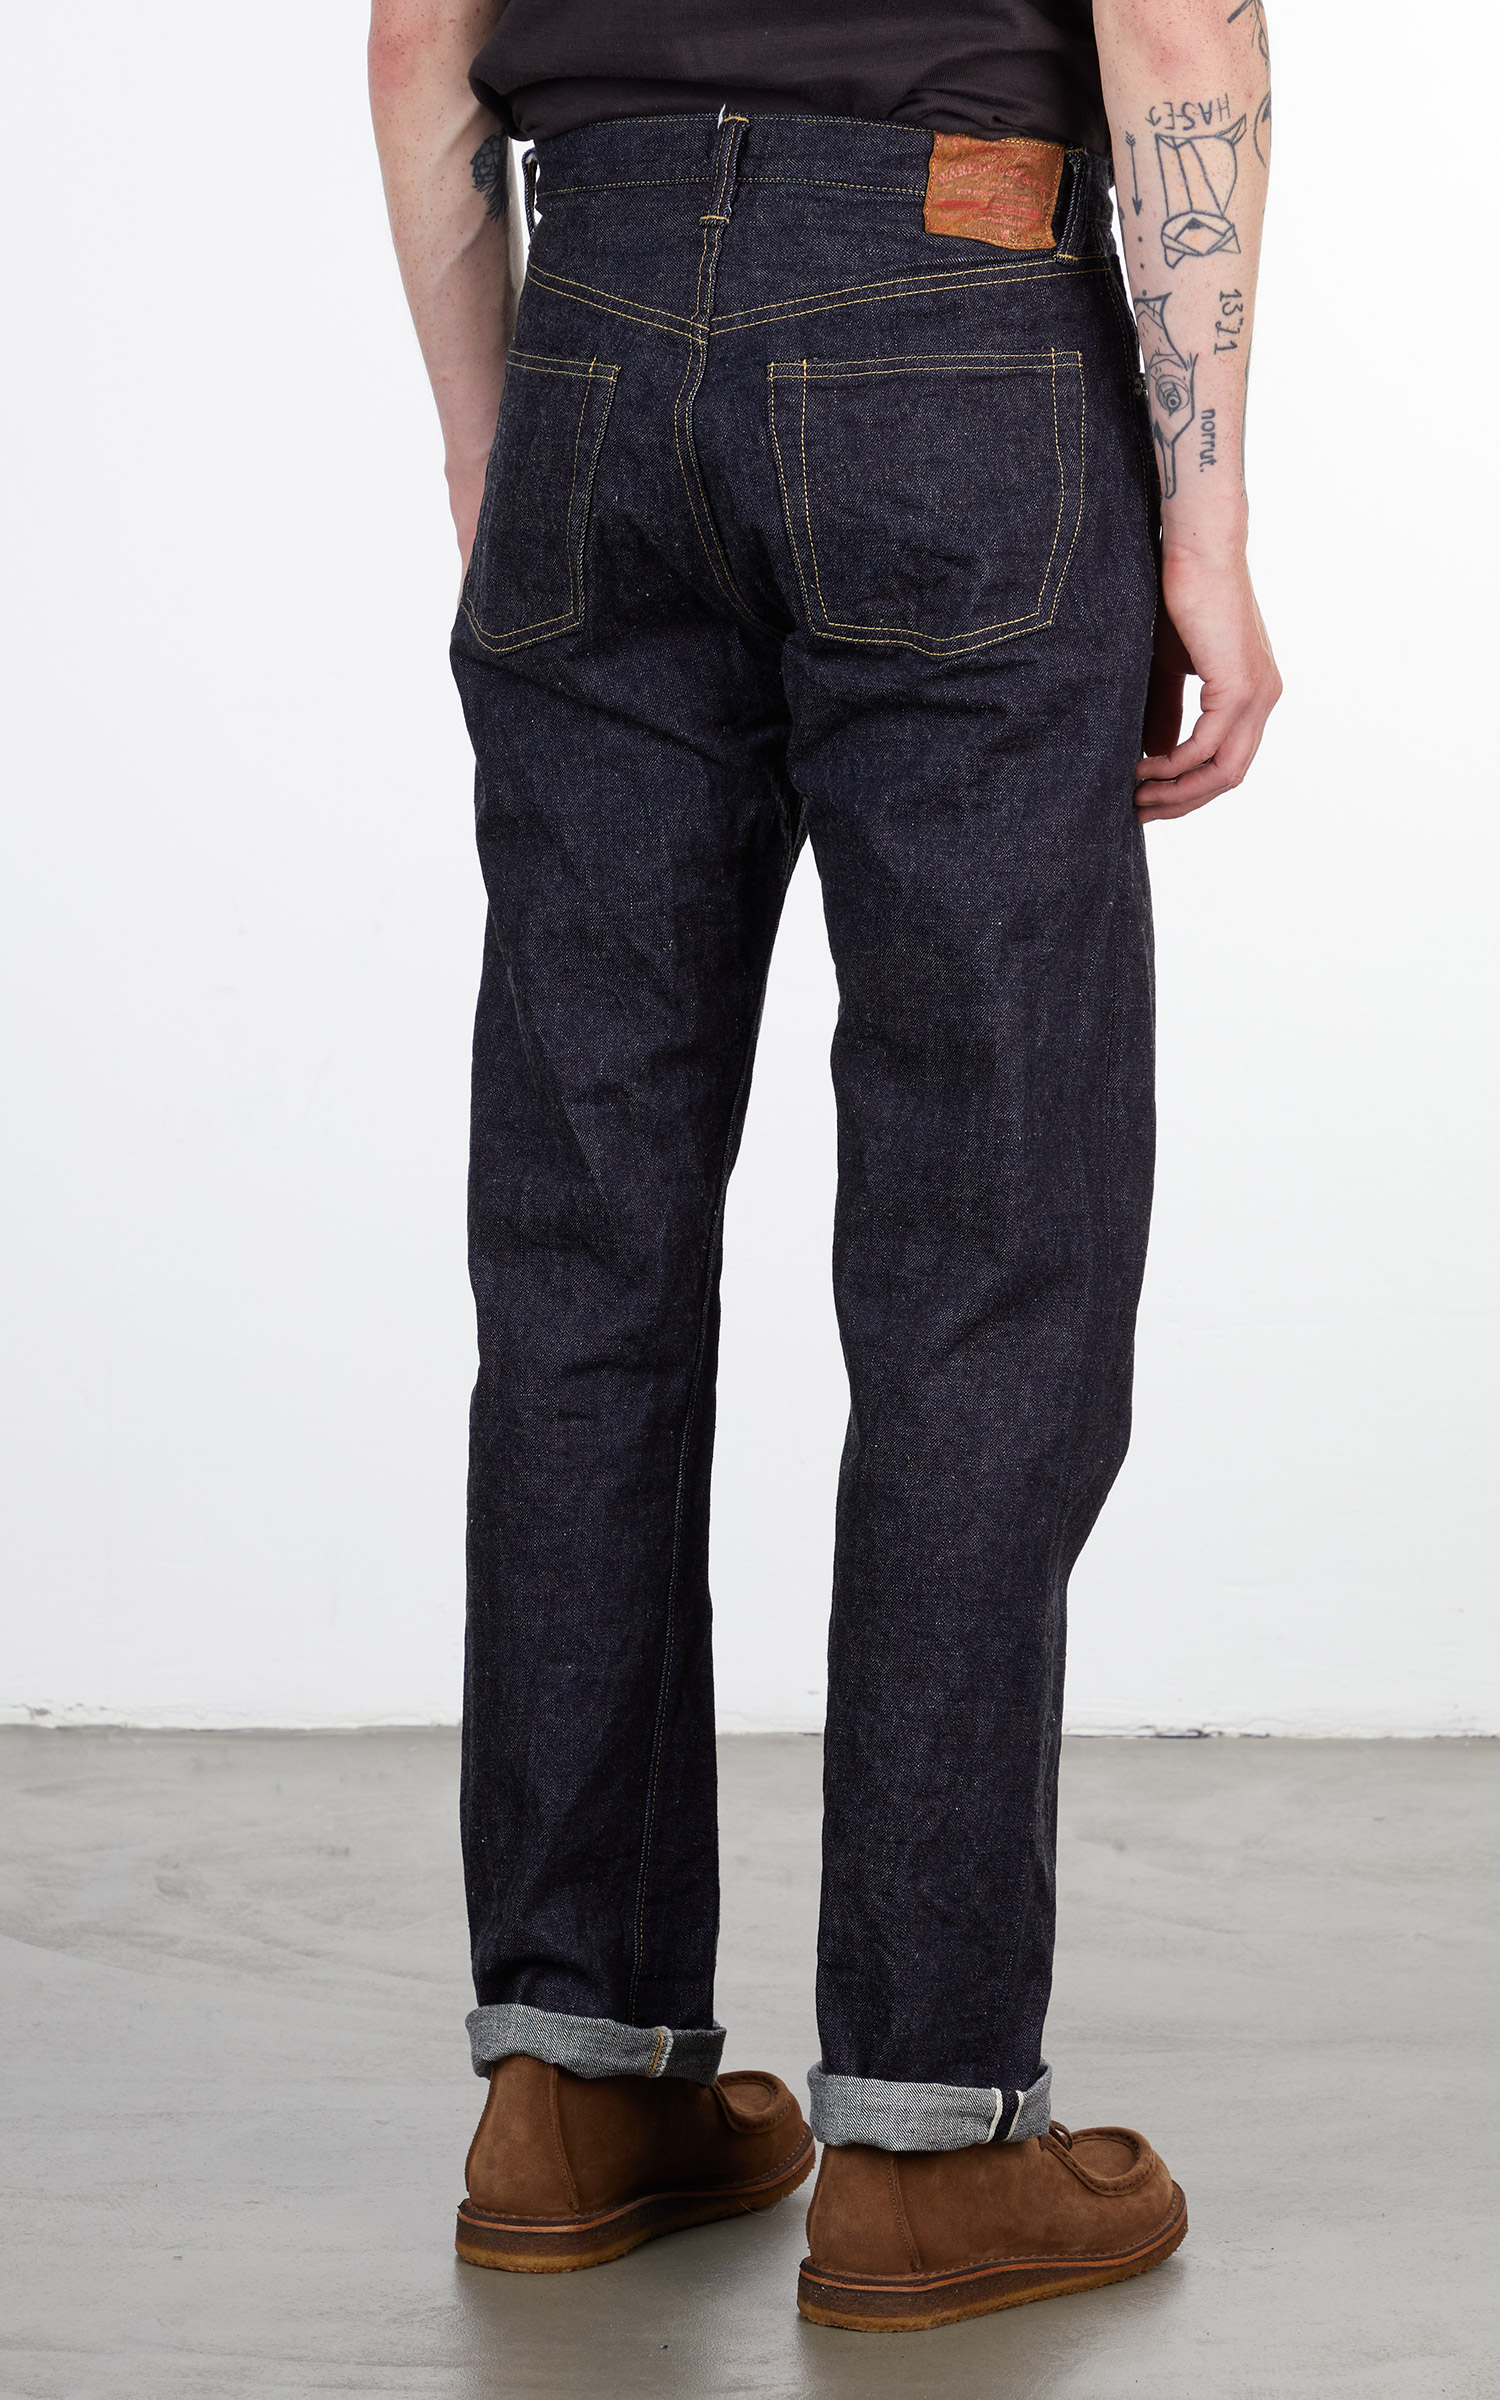 Warehouse & Co. S1003XX 1944 Model Jeans Duck Digger Indigo One Wash ...